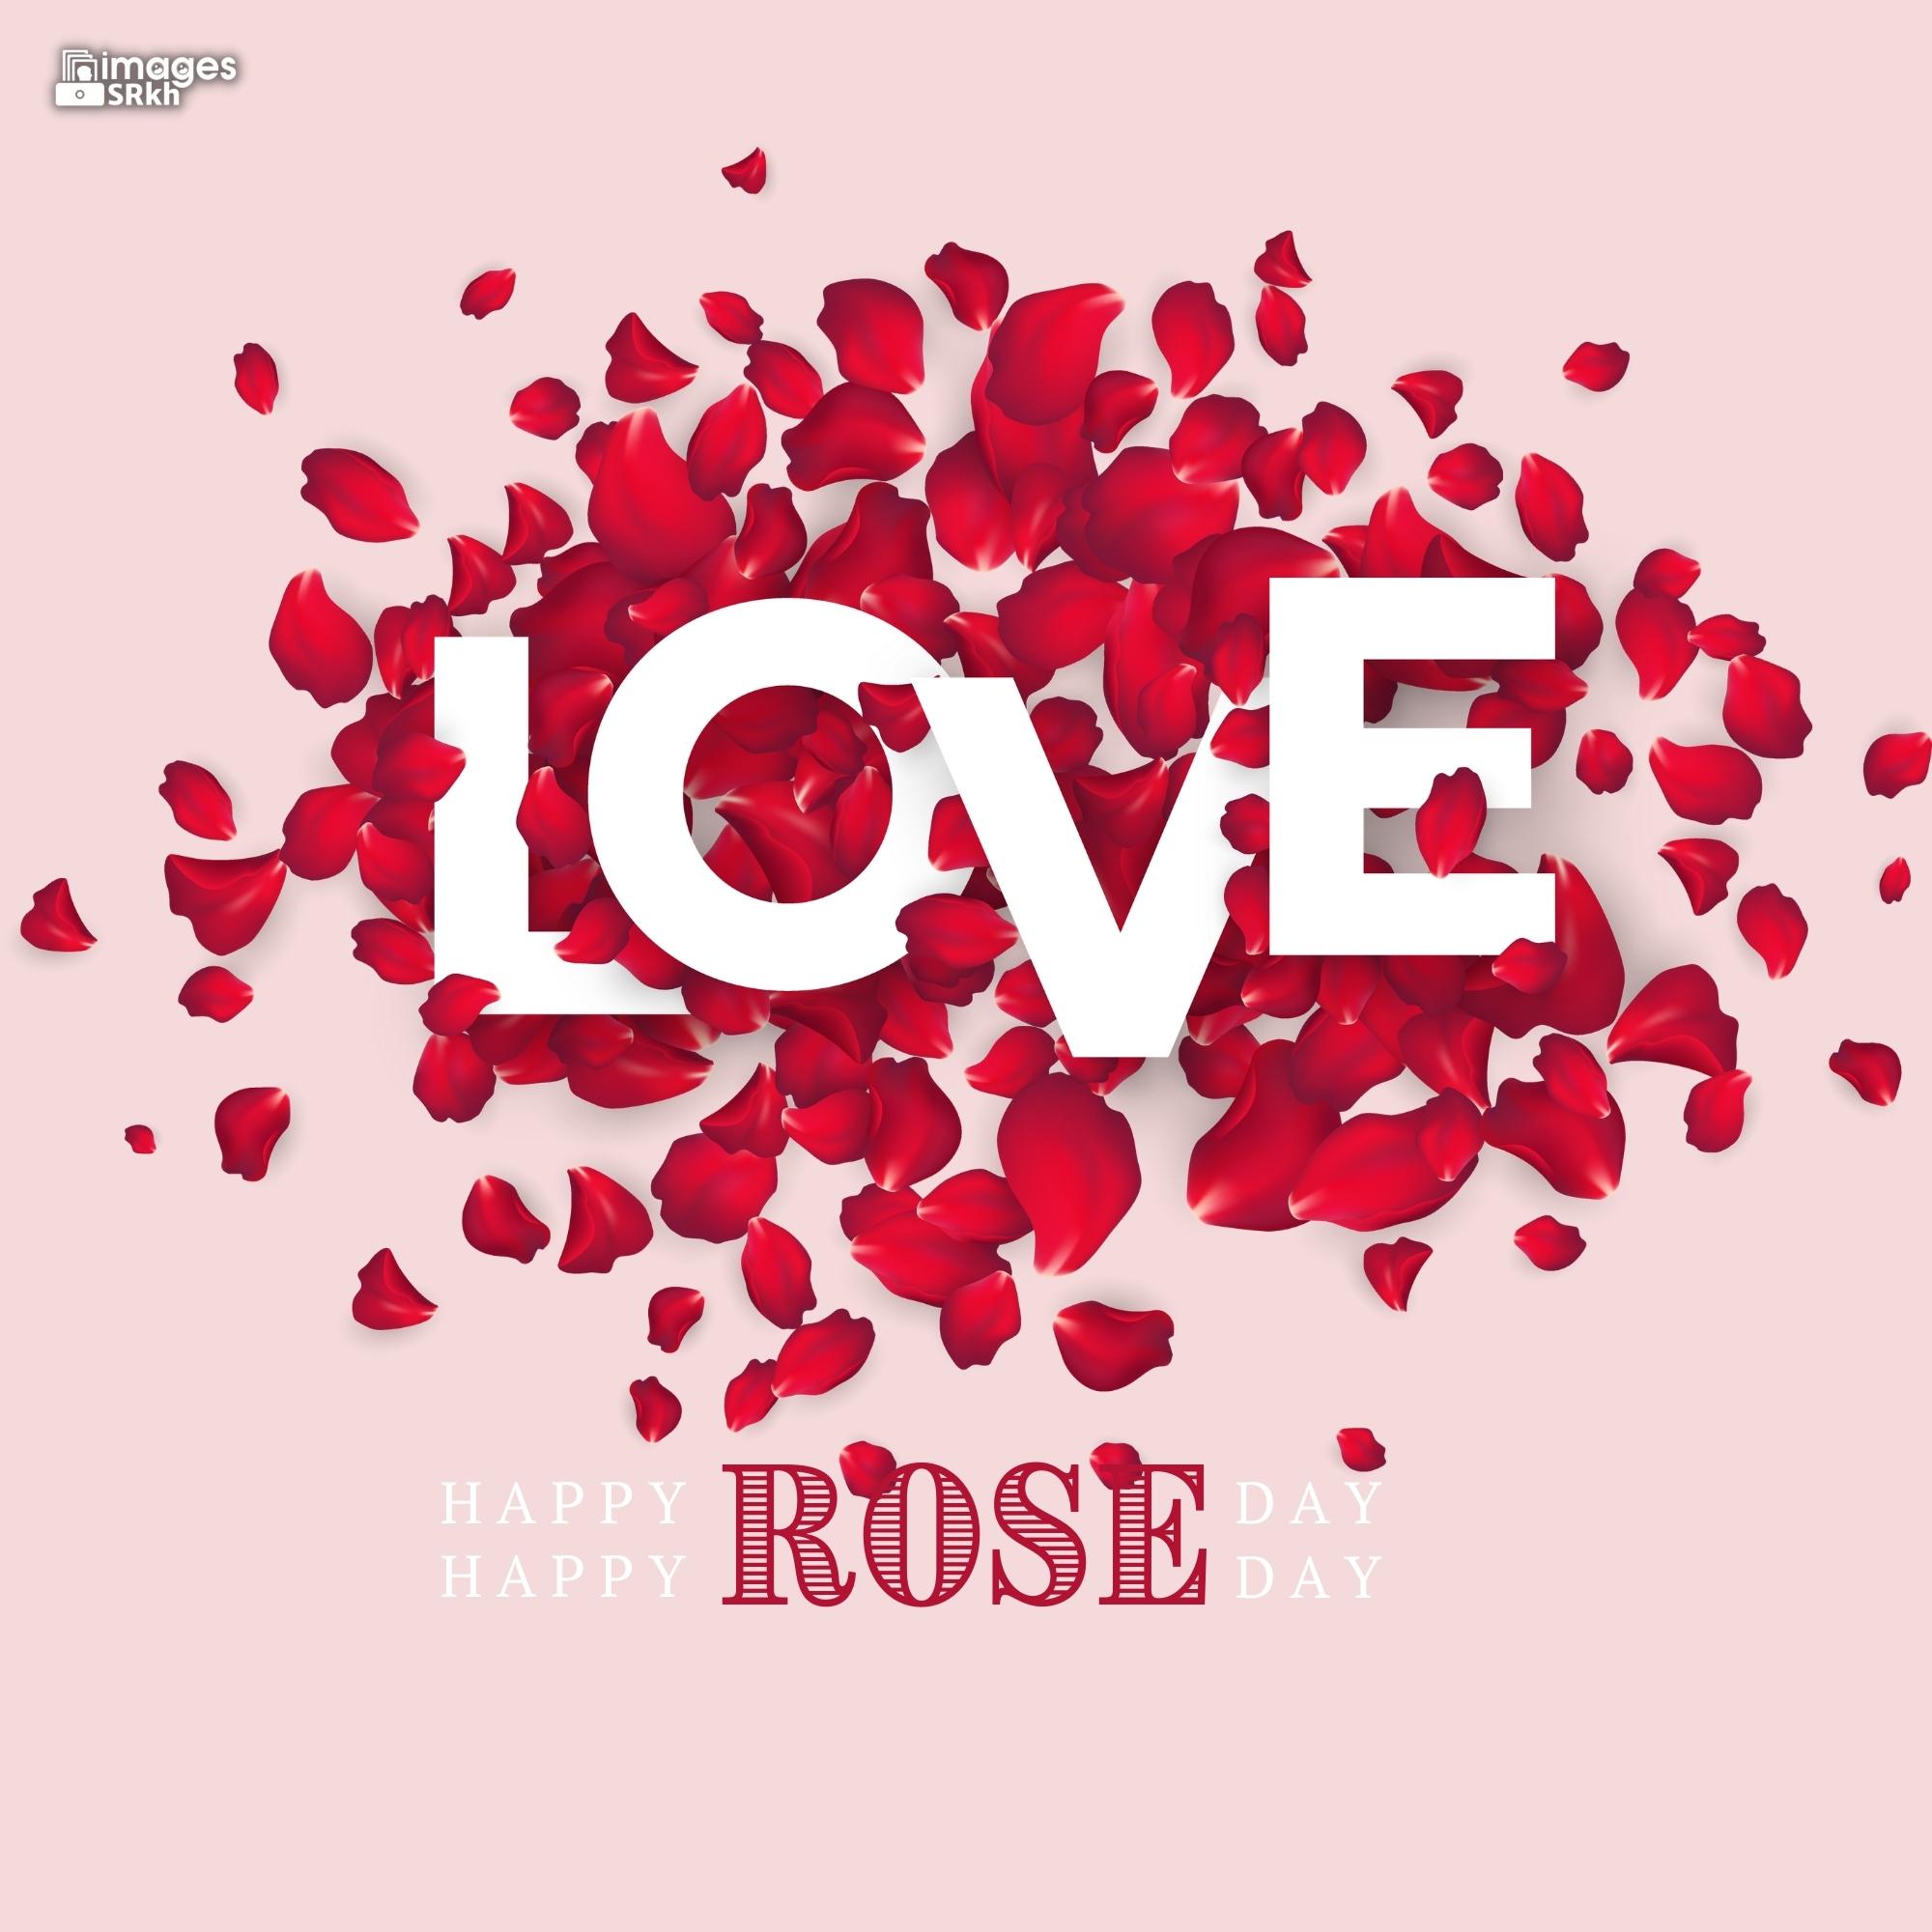 Happy Rose Day Image Hd Download (69)